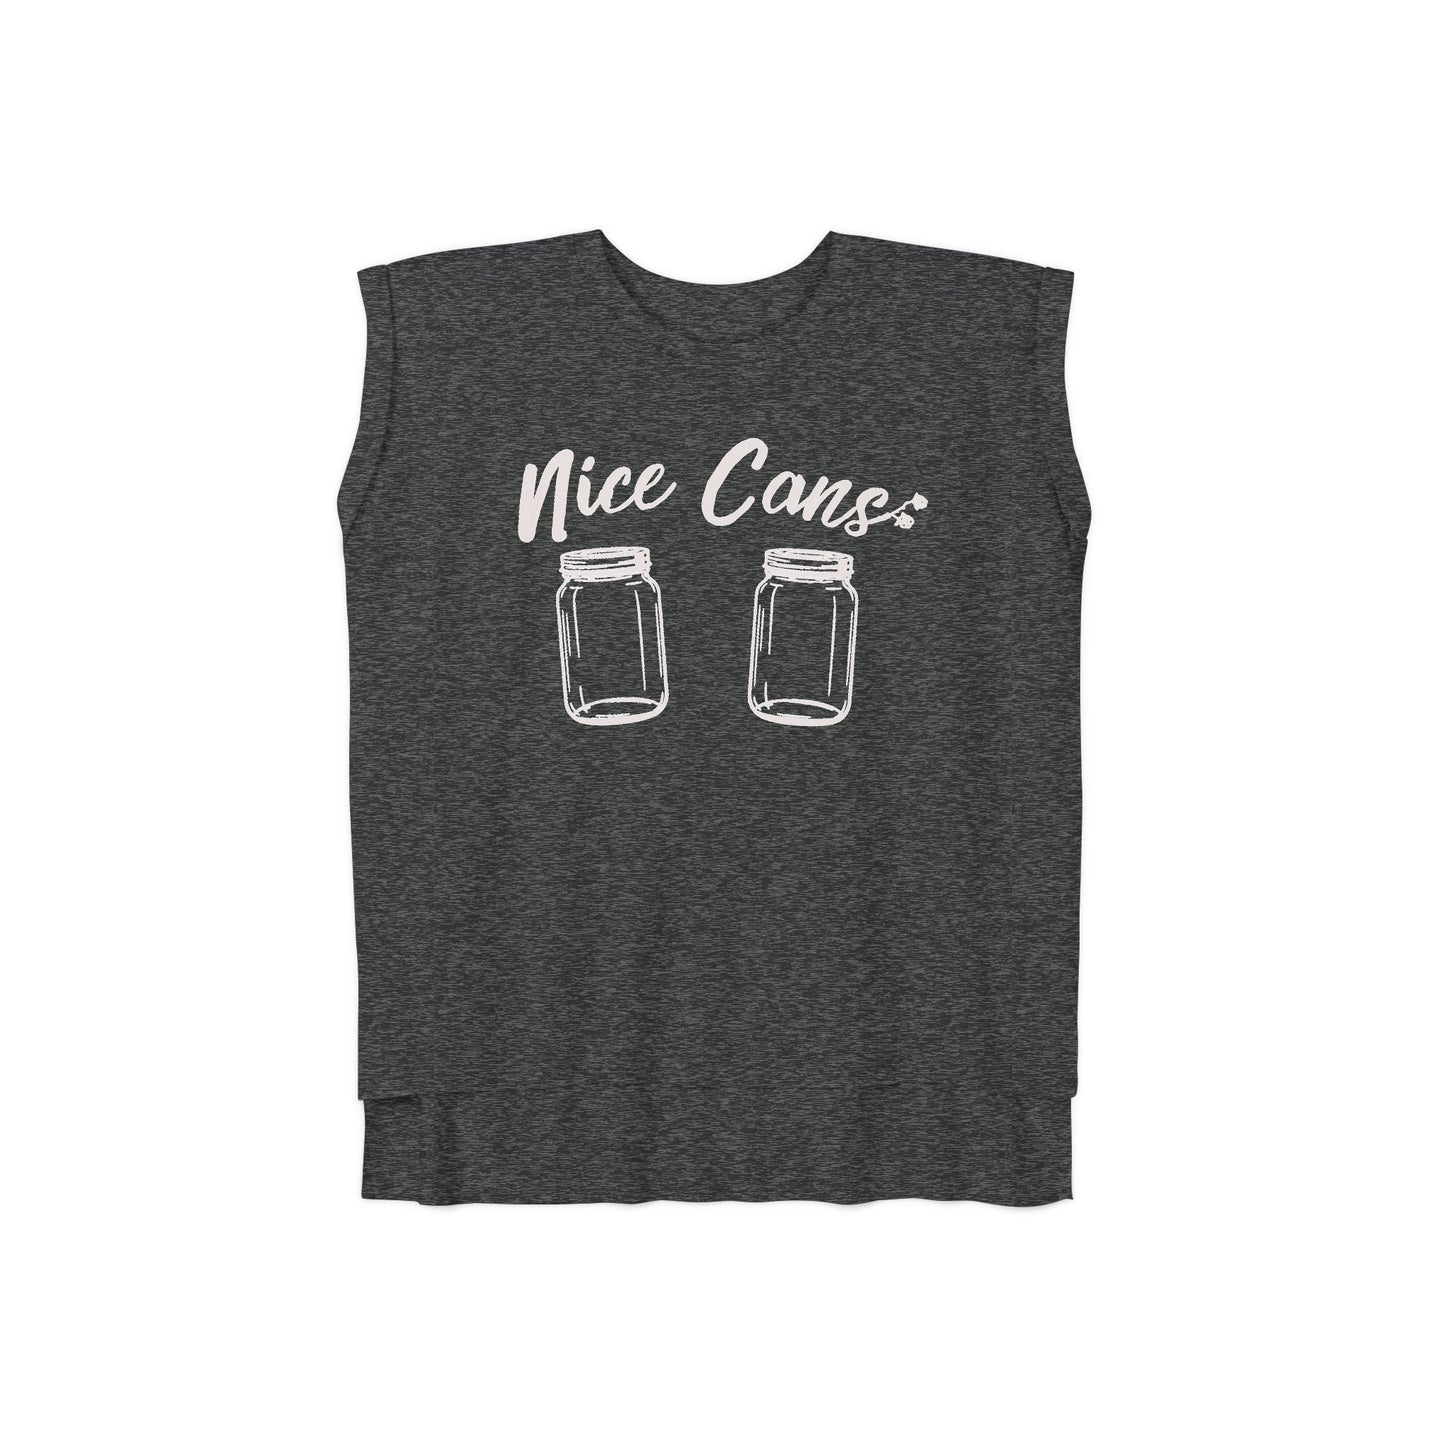 Nice Cans Women’s Flowy Rolled Cuffs Muscle Tee